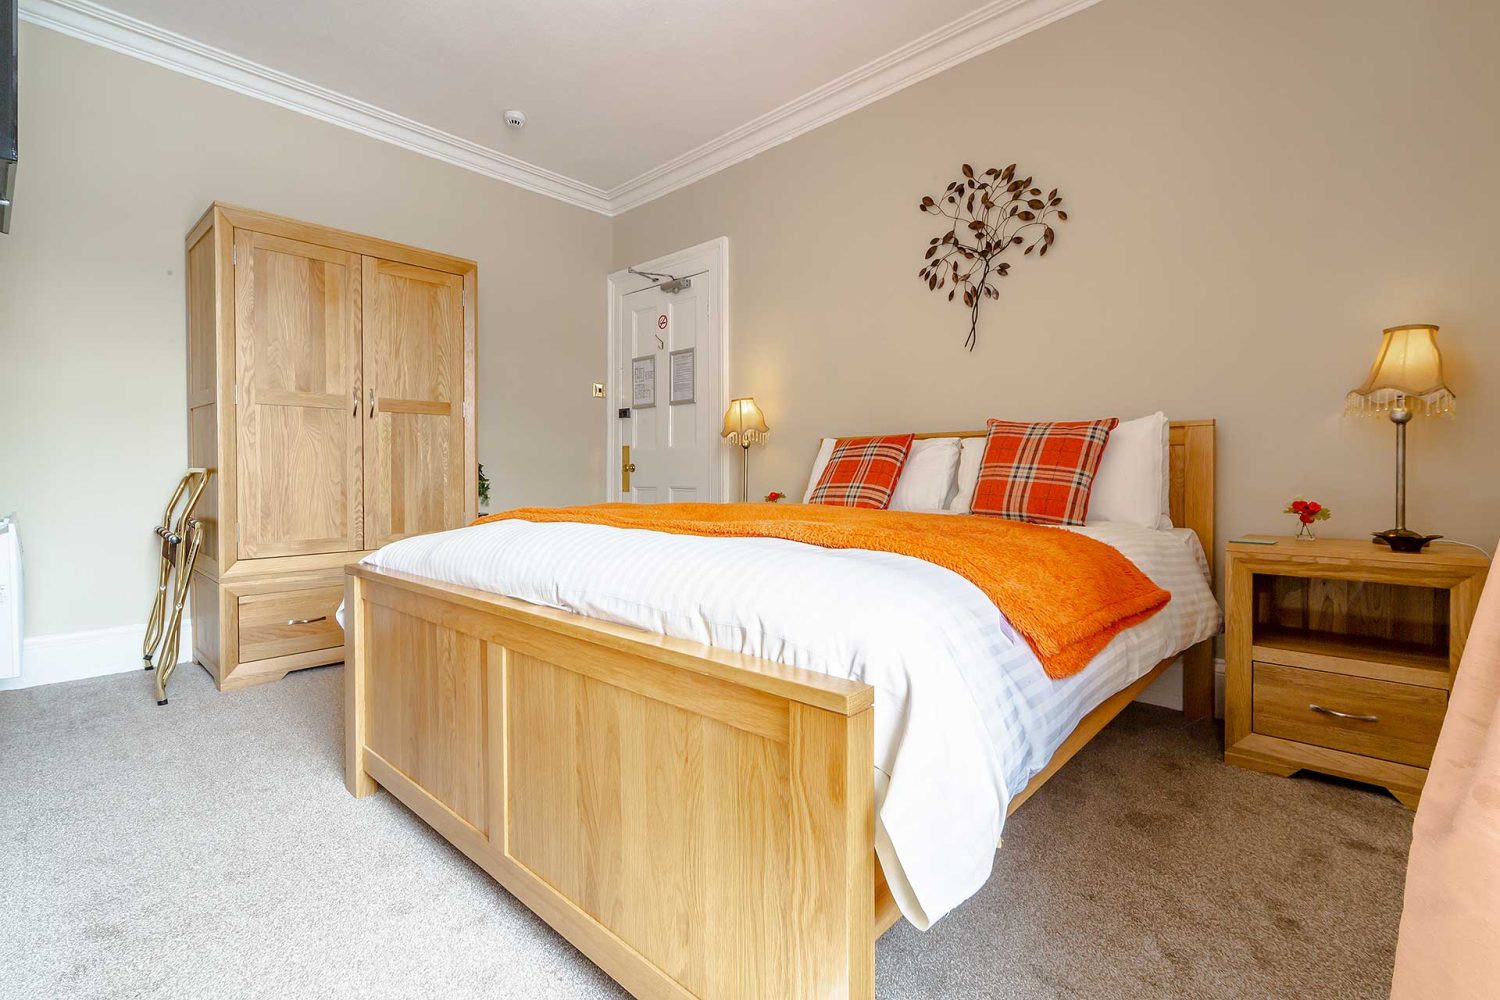 Large double bed in lightly decorated room